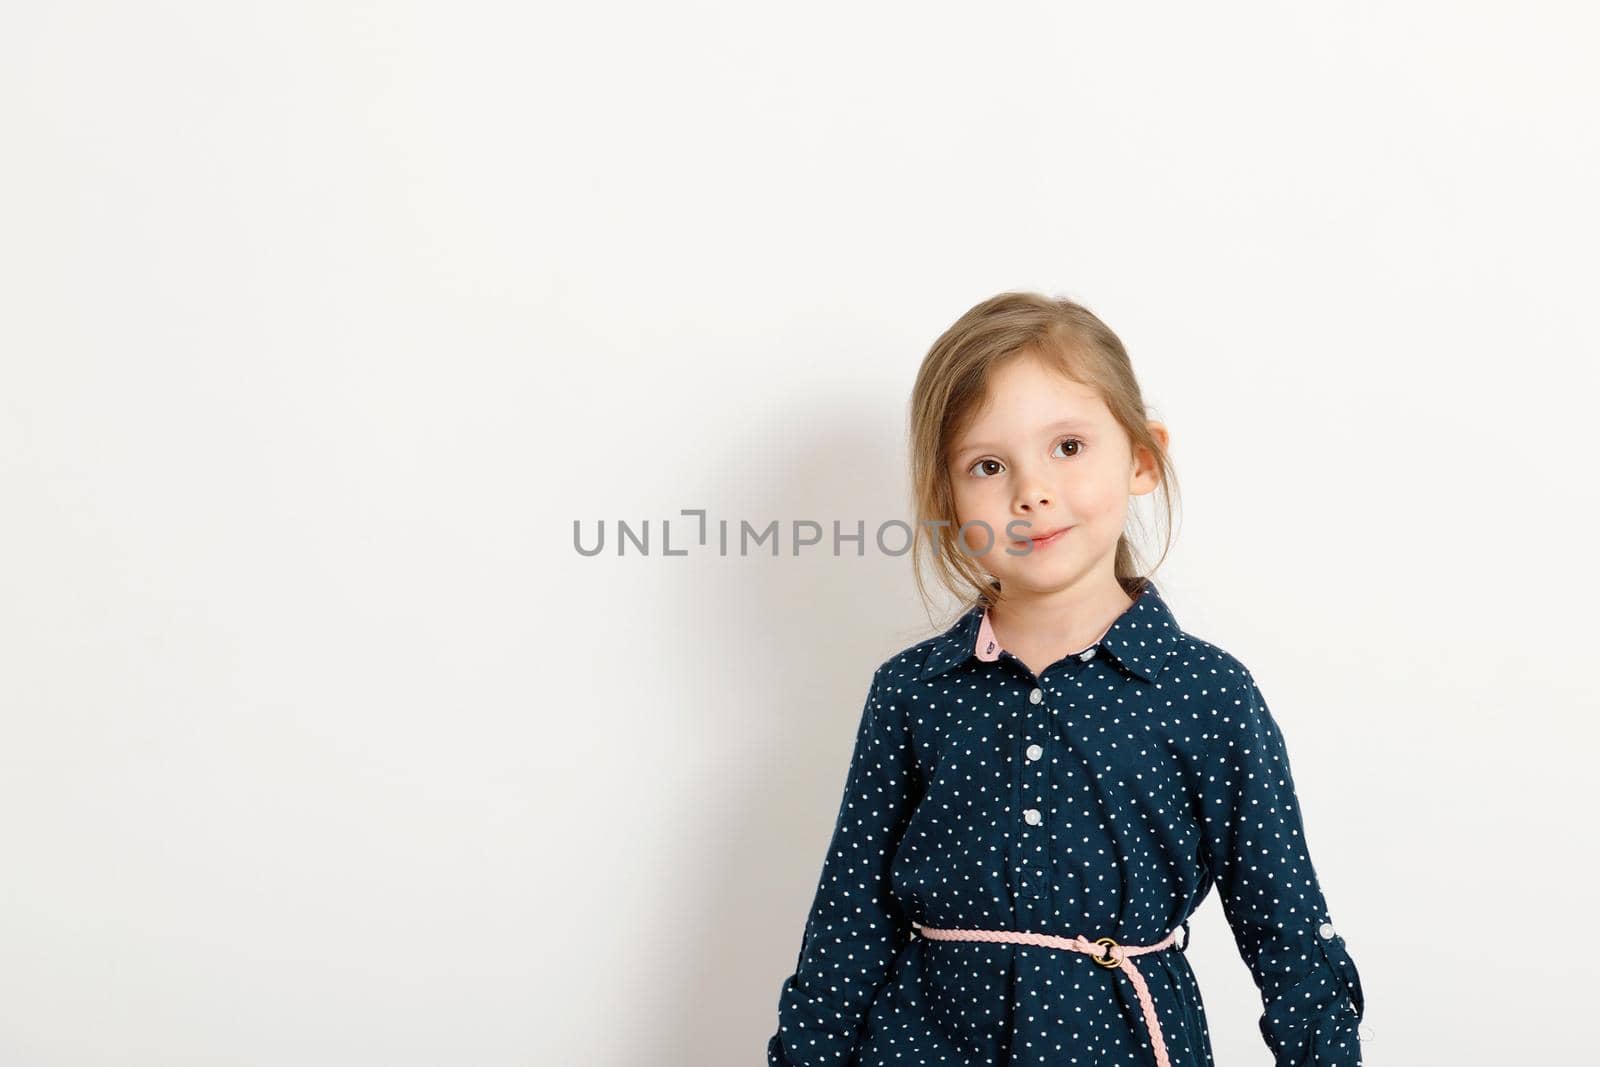 Little cute caucasian girl 4-6 years old wearing a blue dress with polka dots stands against the background of a white wall.